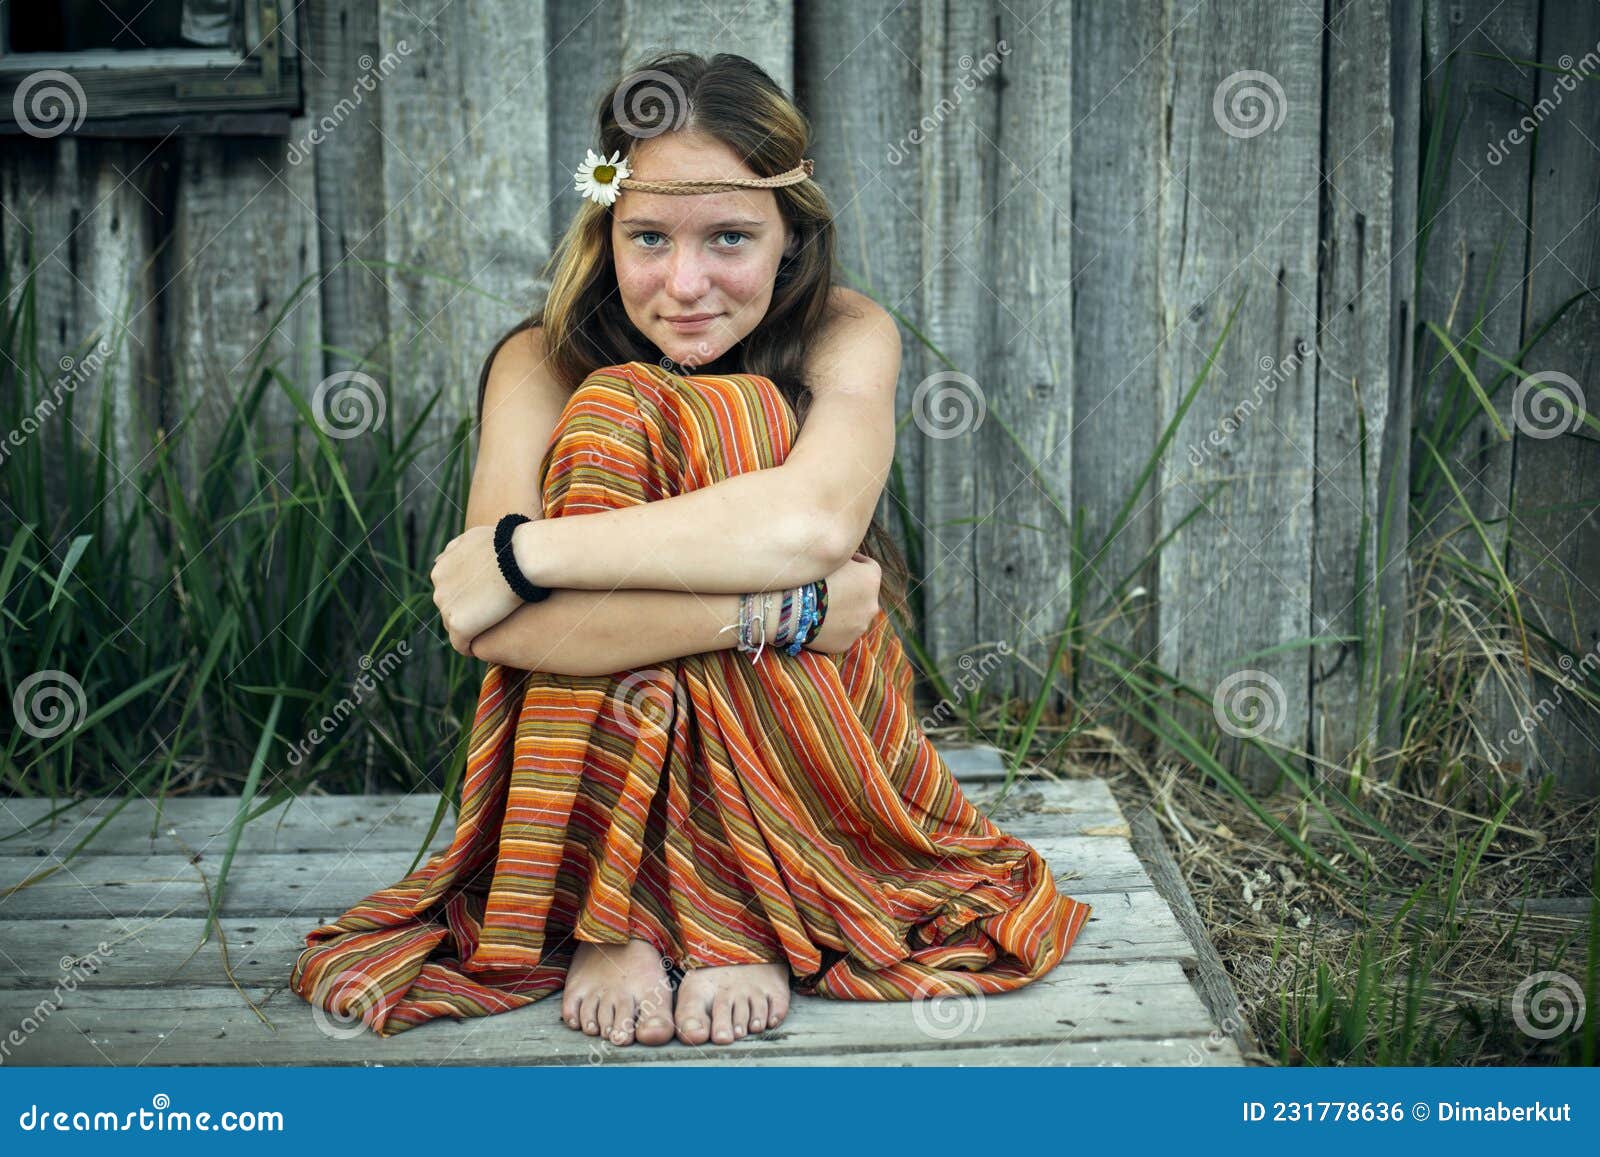 A Girl in Hippie Clothes Sitting Alone in the Village Outdoors. Stock ...